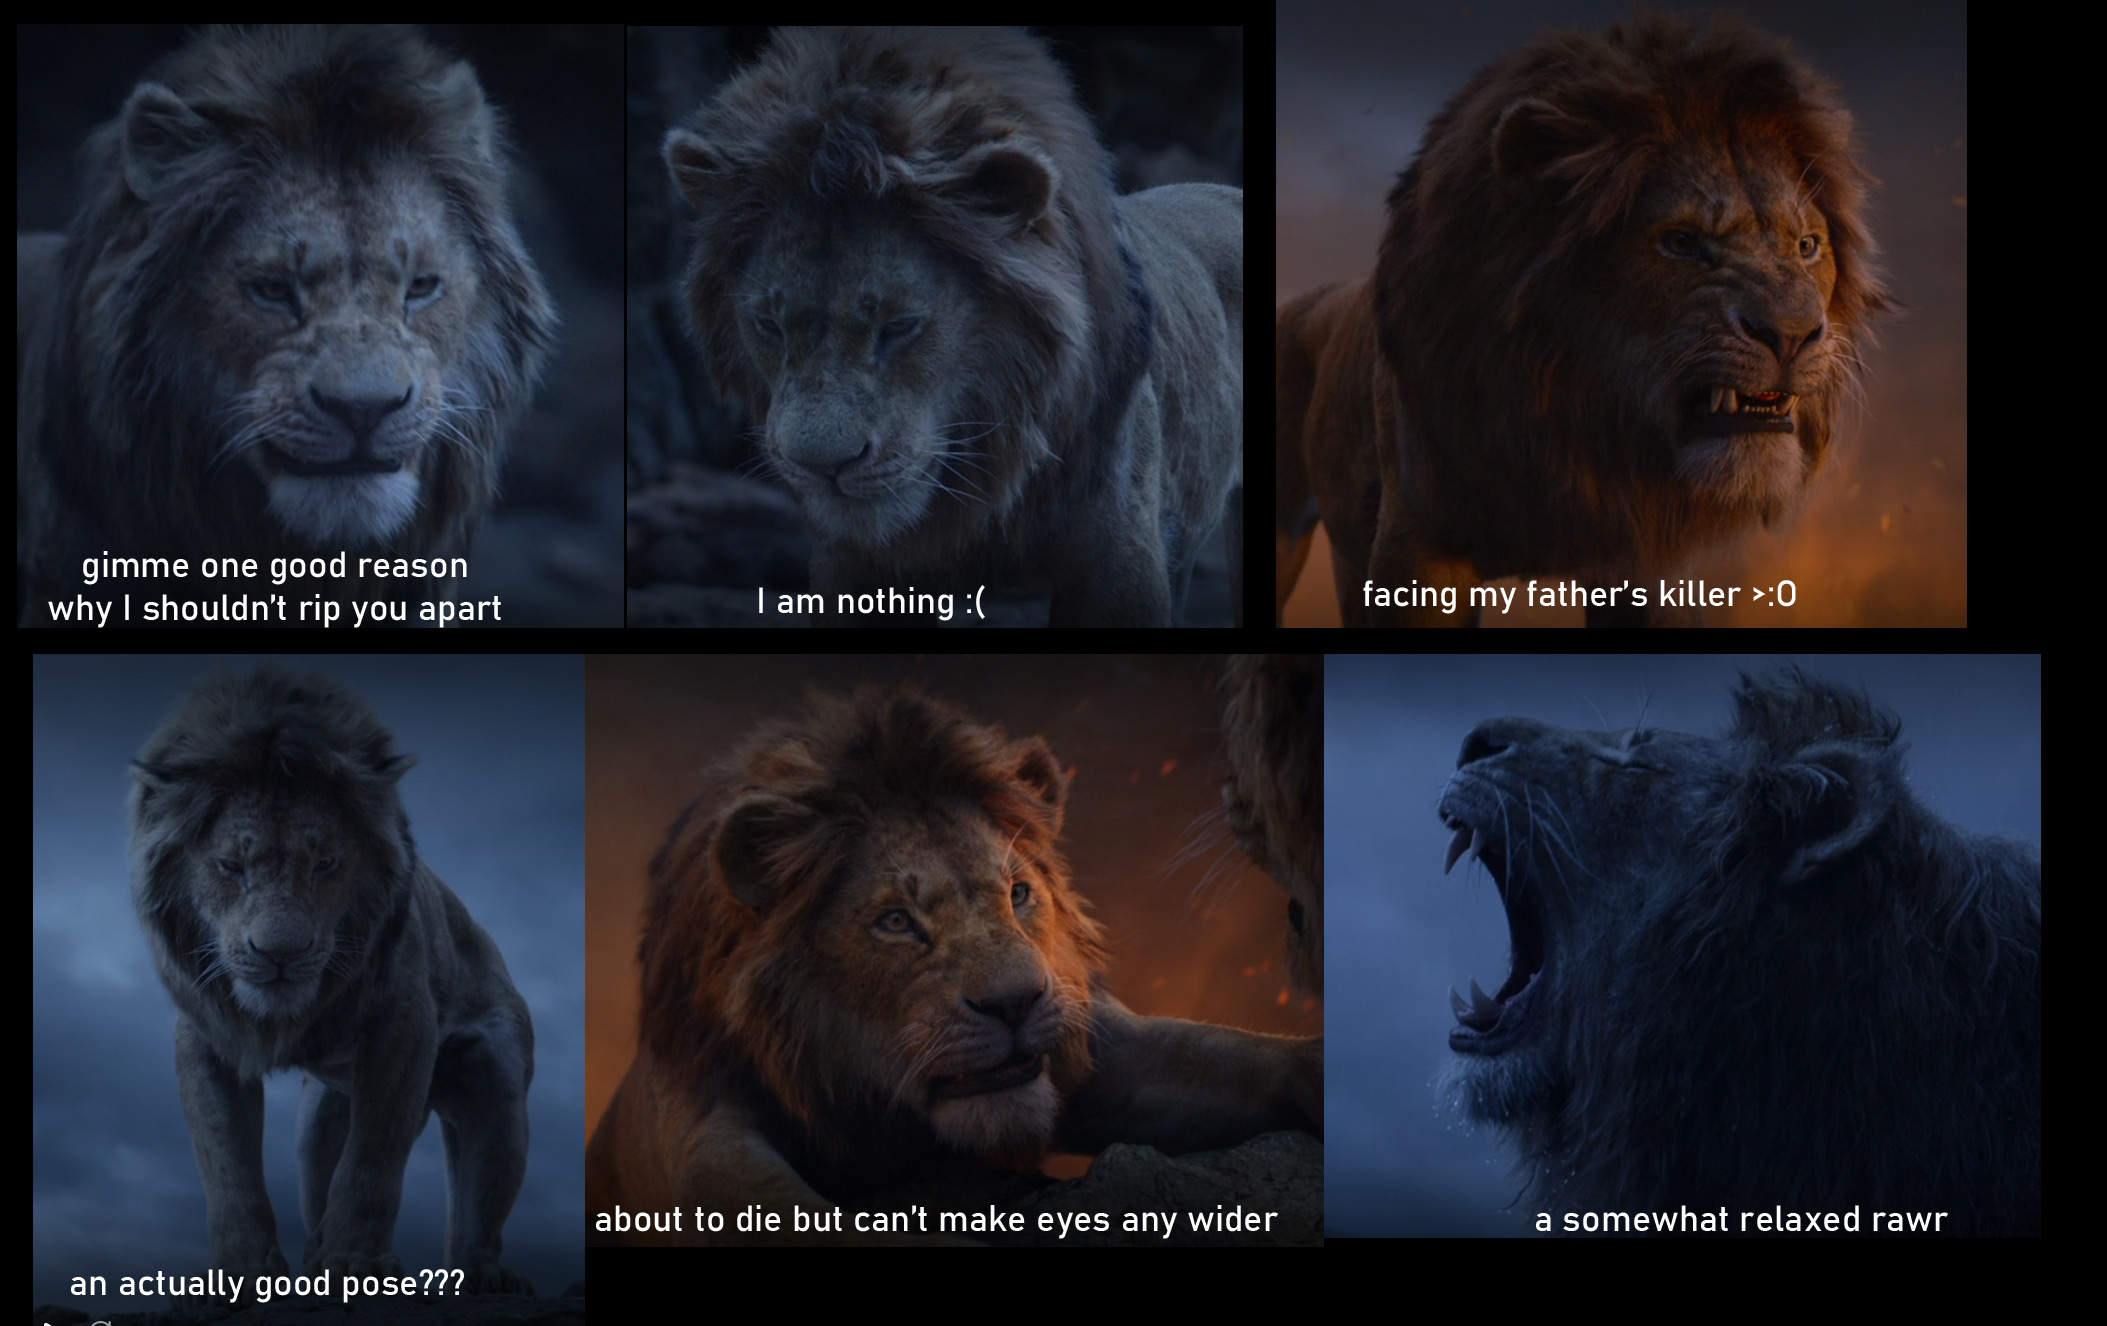 Twitter 上的 Tigrin As A Side Project To Practice Using Maya I Ve Downloaded A Lion Rig And Decided To Do Some Facial Expressions To Explore How To Make A Realistic Lion Emote Without